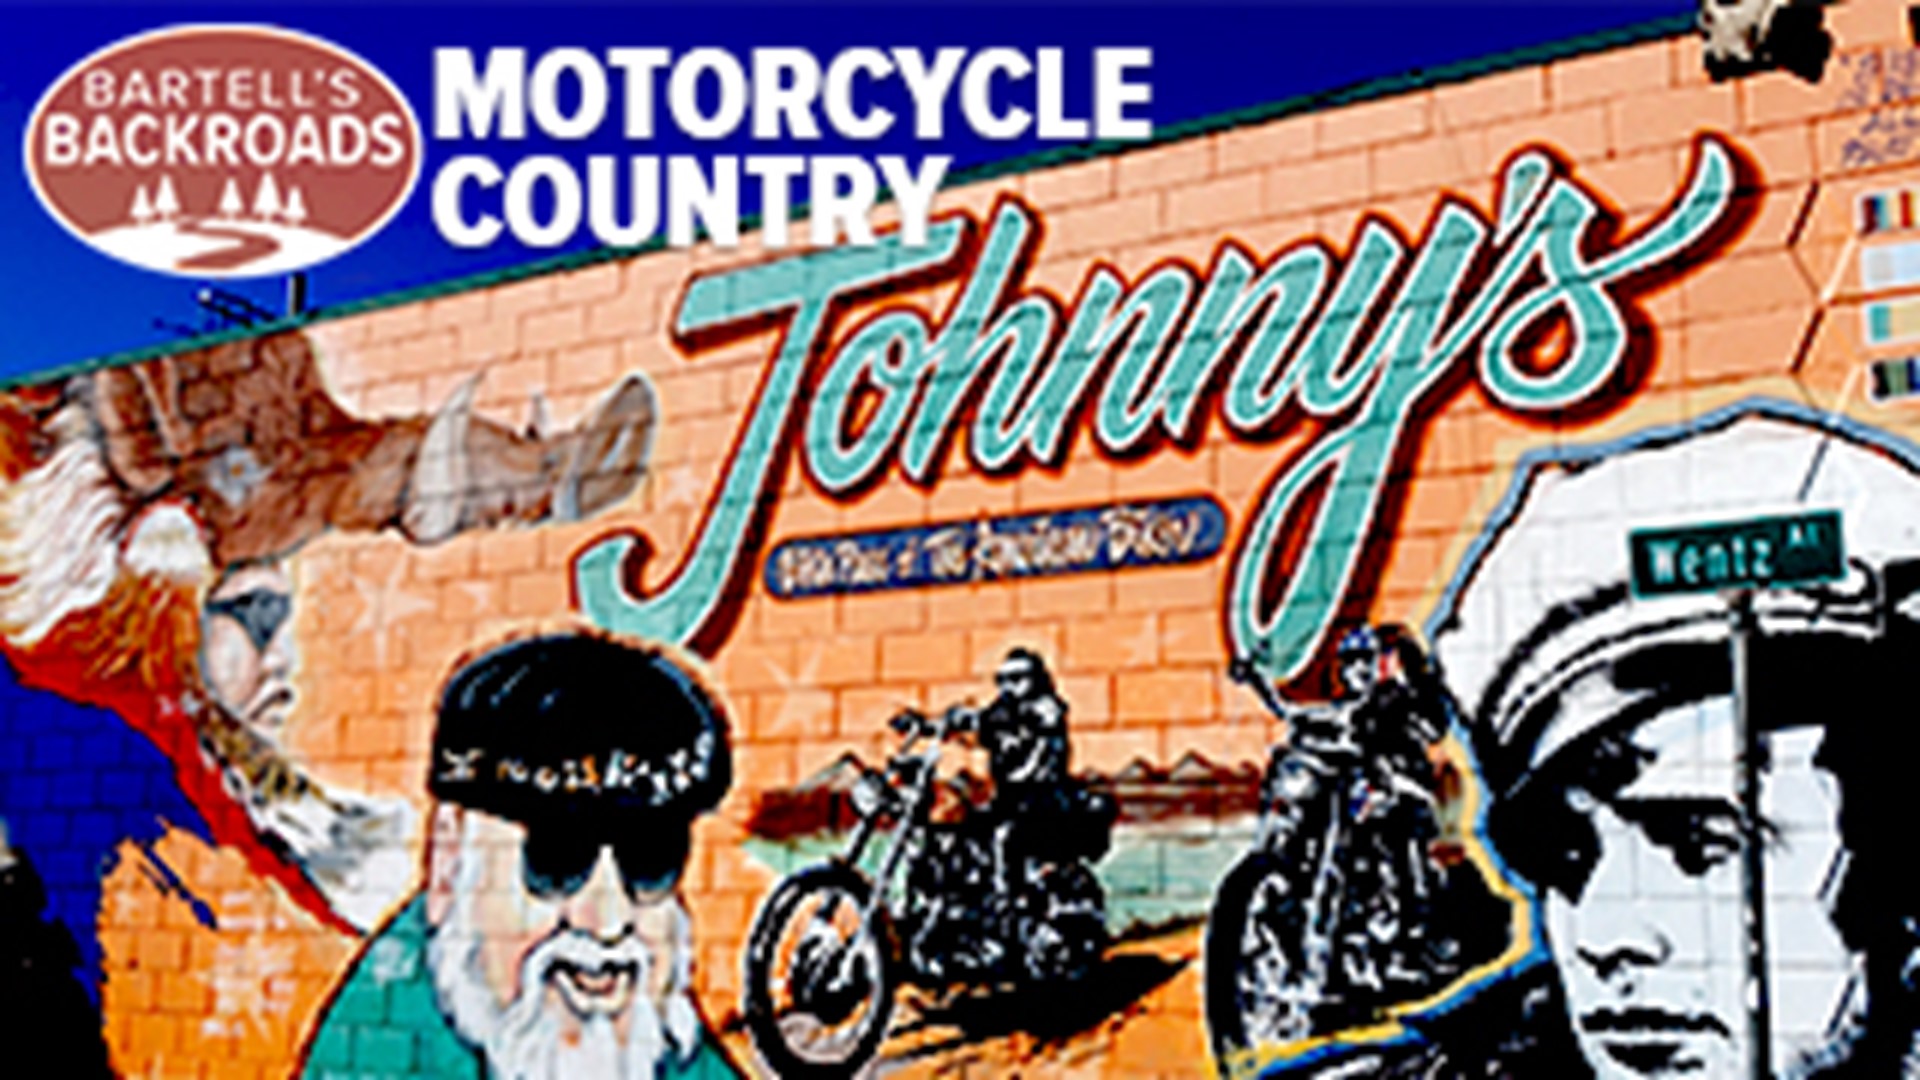 Hollister, California proudly claims it's the "Birth place of The American Biker" for it's rough and tough past. John Bartell checks the state of the town's legacy.